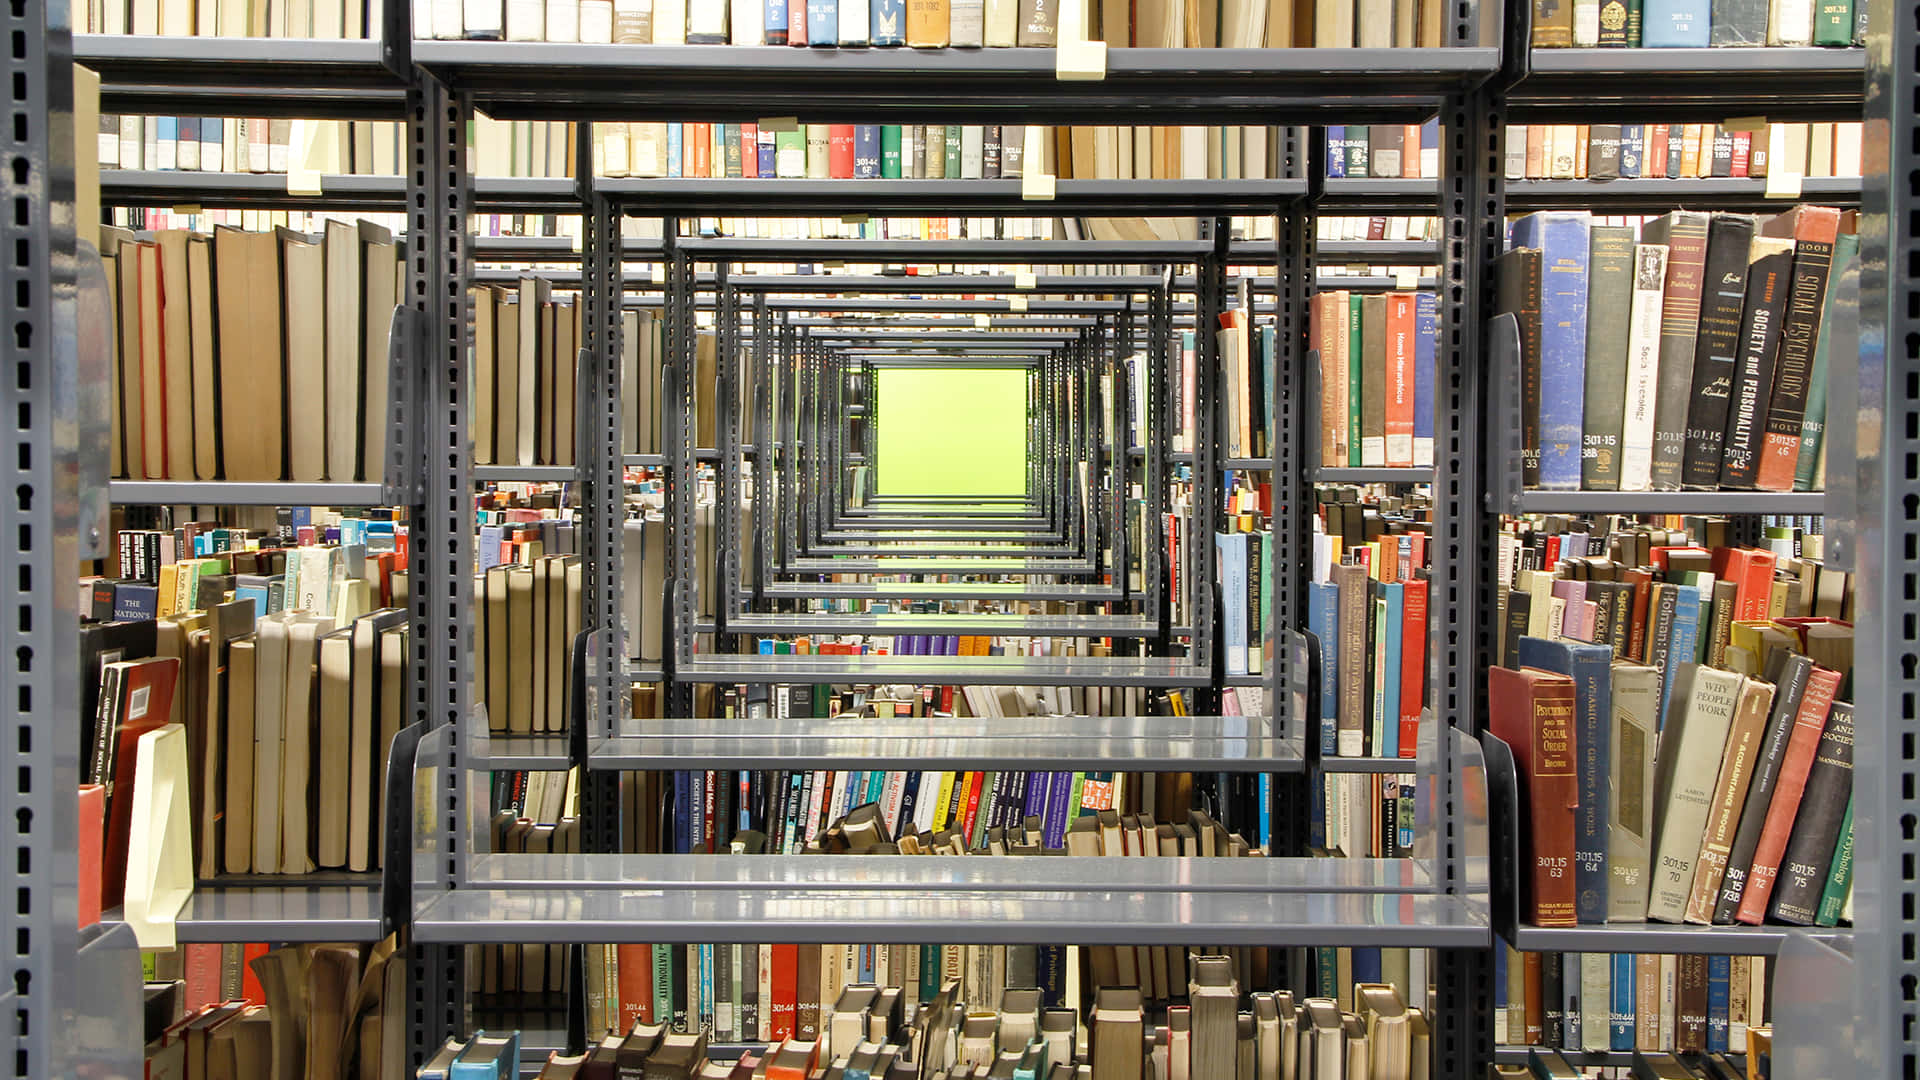 A Library With Many Books On Shelves